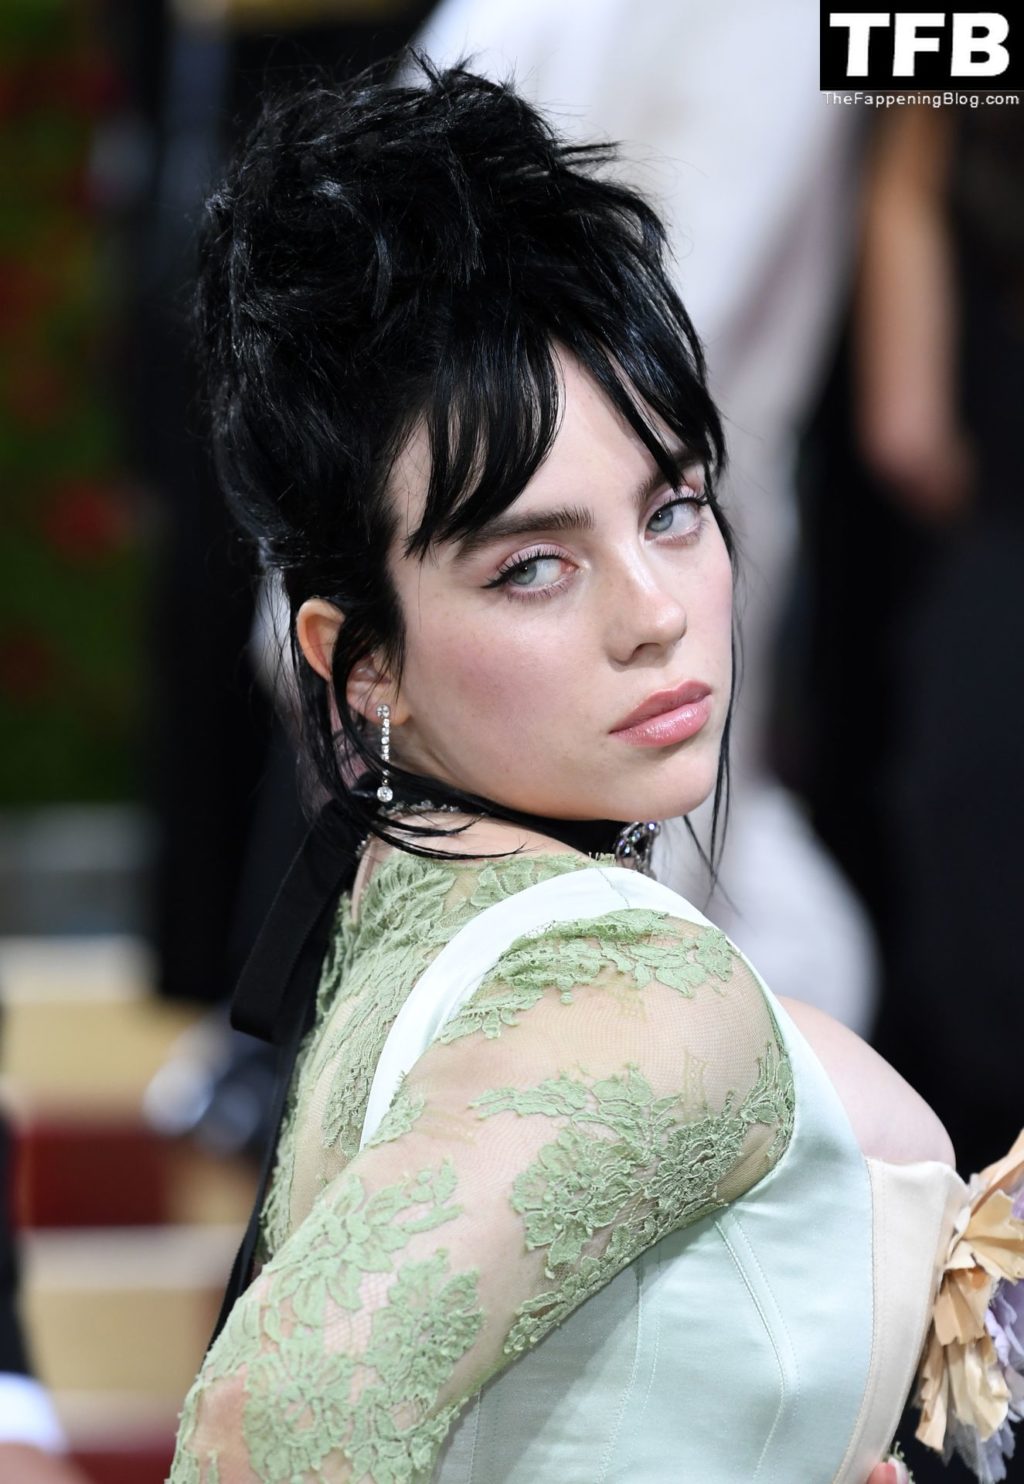 Billie Eilish Sexy The Fappening Blog 107 1024x1484 - Billie Eilish Showcases Nice Cleavage at The 2022 Met Gala in NYC (155 Photos)